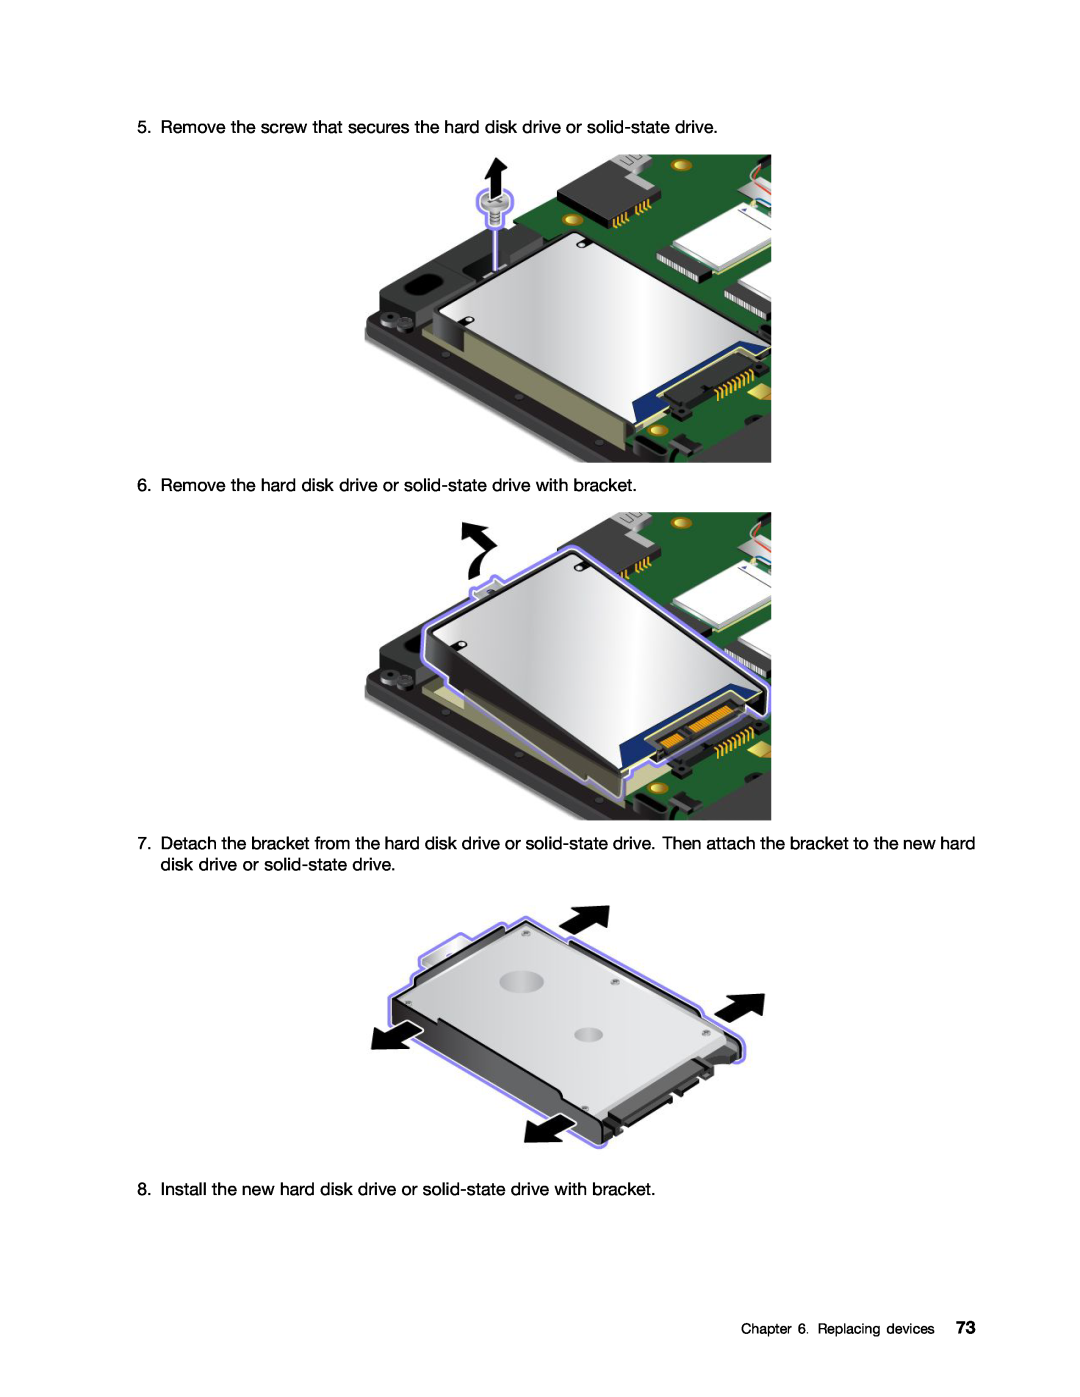 Lenovo 20AQ004JUS, 20AQ006HUS manual Remove the hard disk drive or solid-state drive with bracket, Replacing devices 